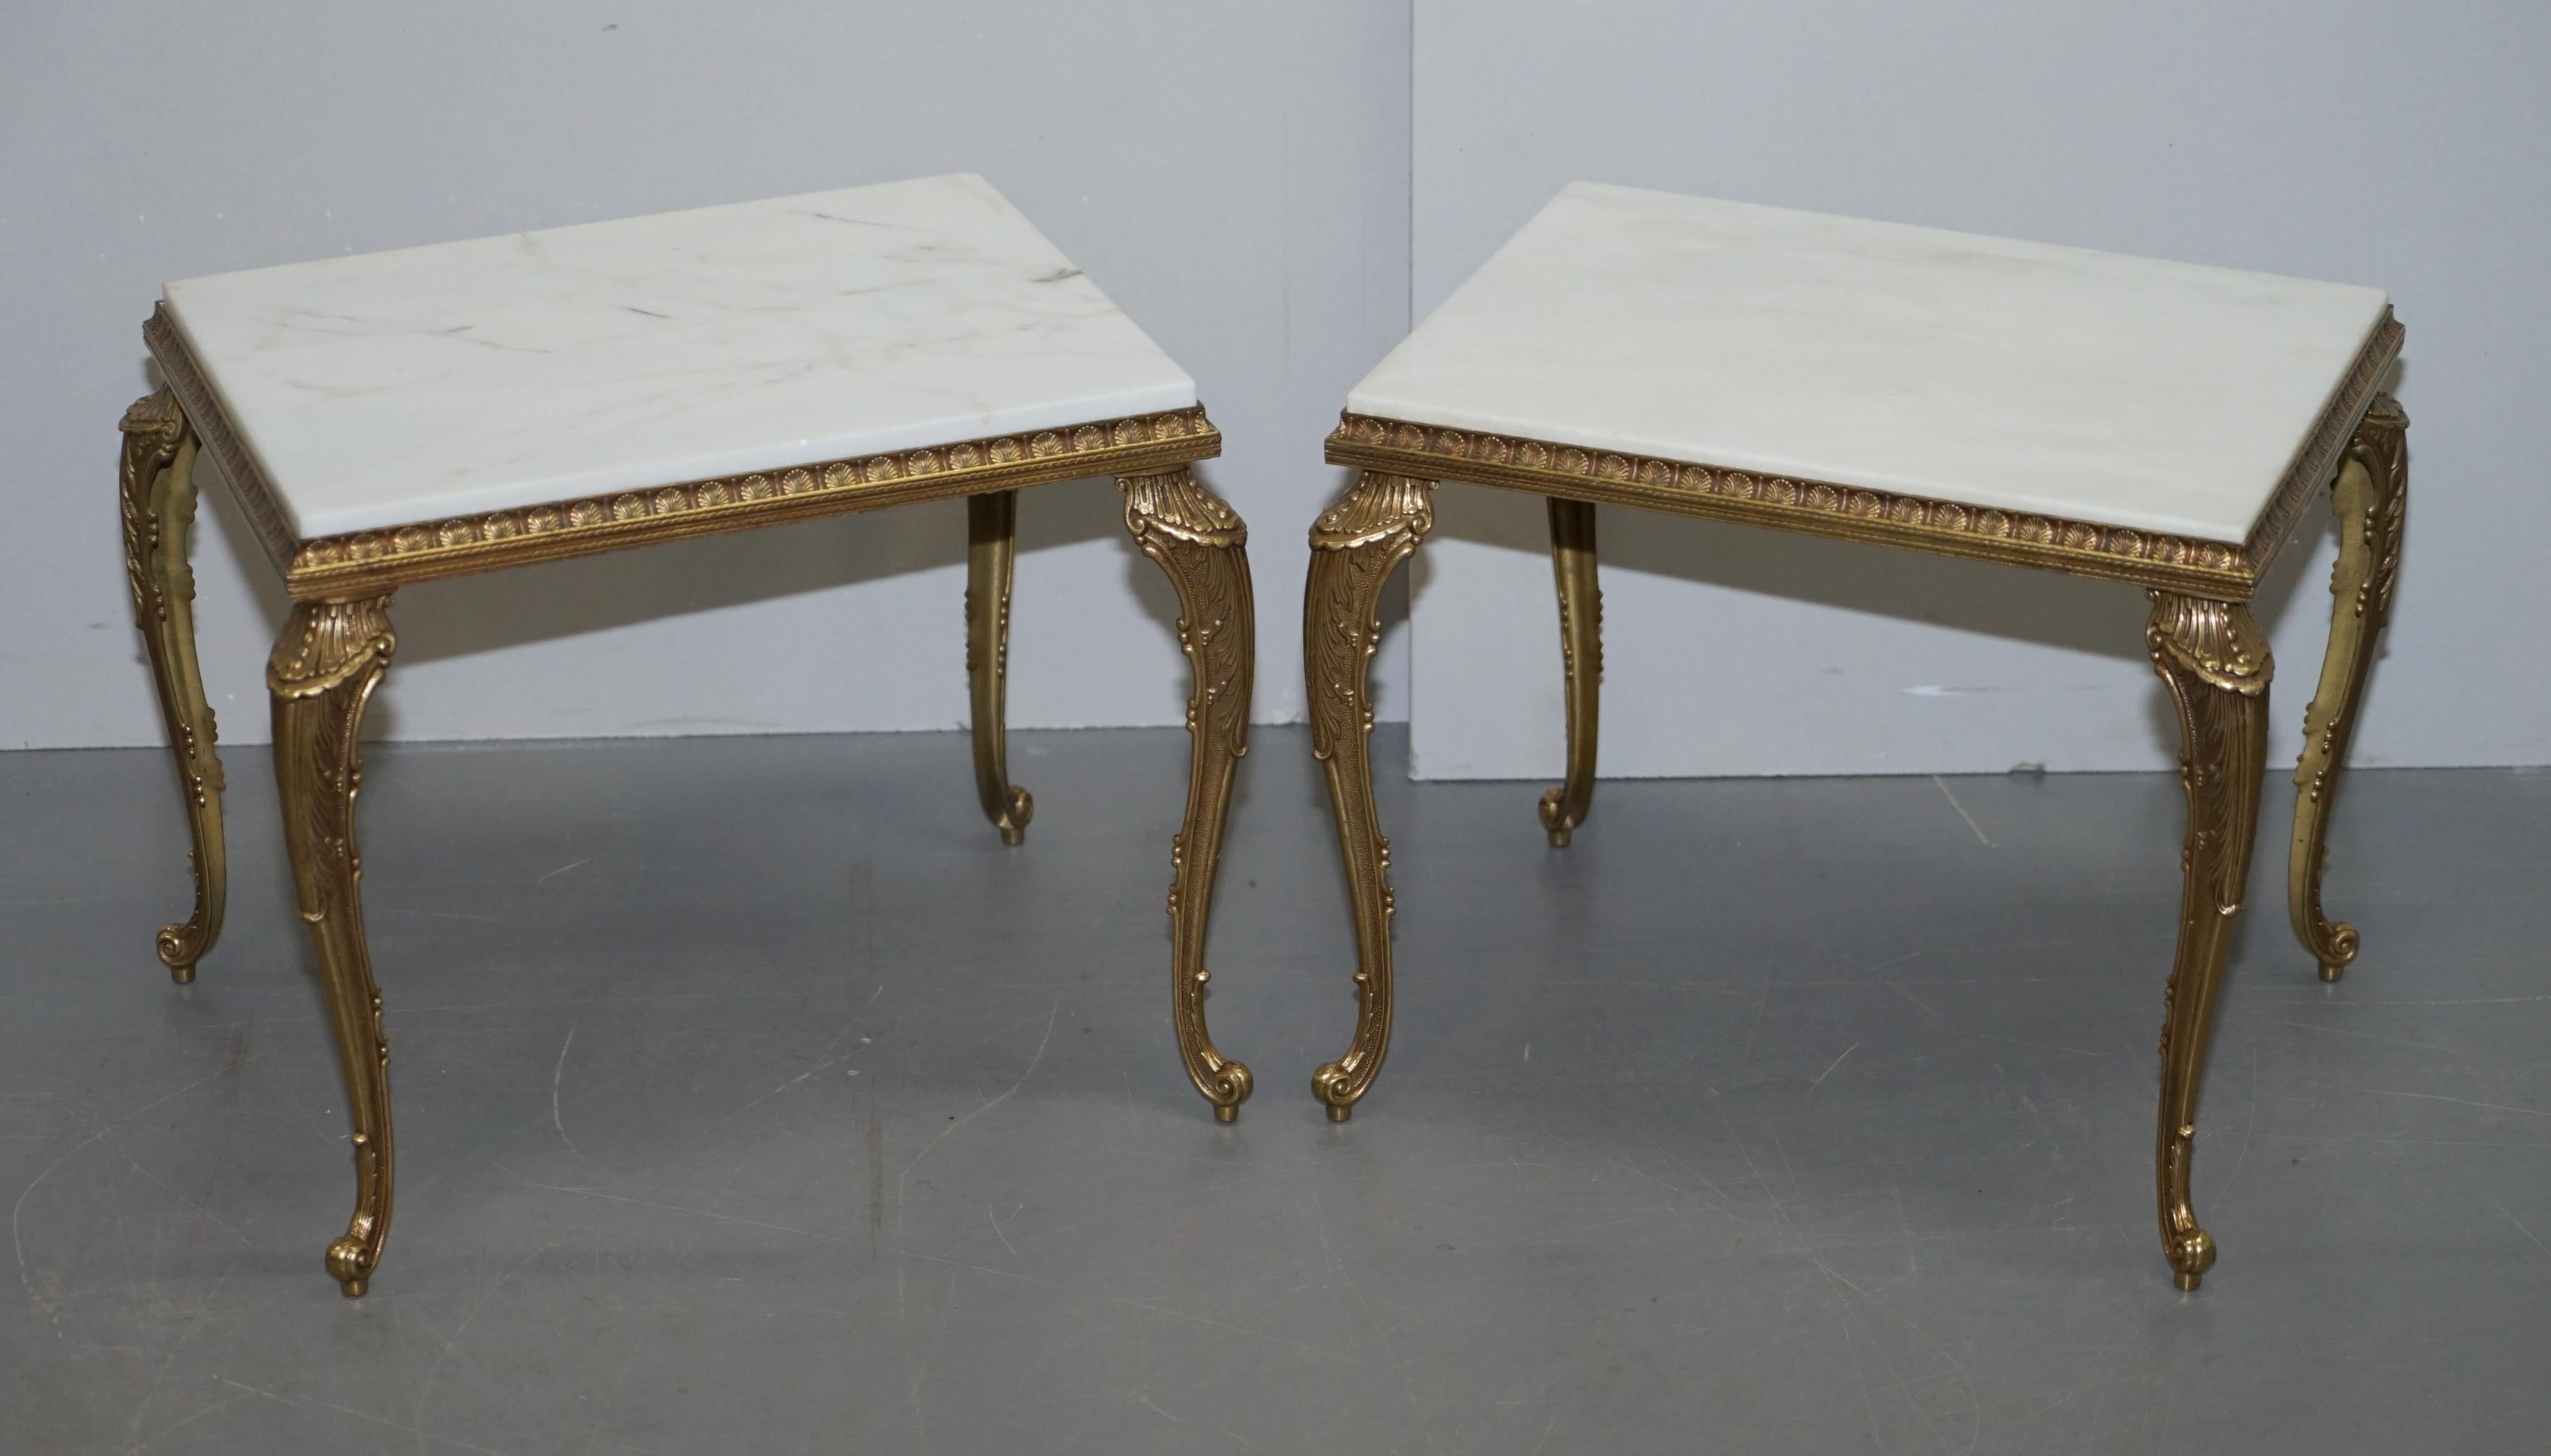 Pair of Lovely circa 1900 French Brass Framed Side Tables Italian Marble Tops For Sale 4